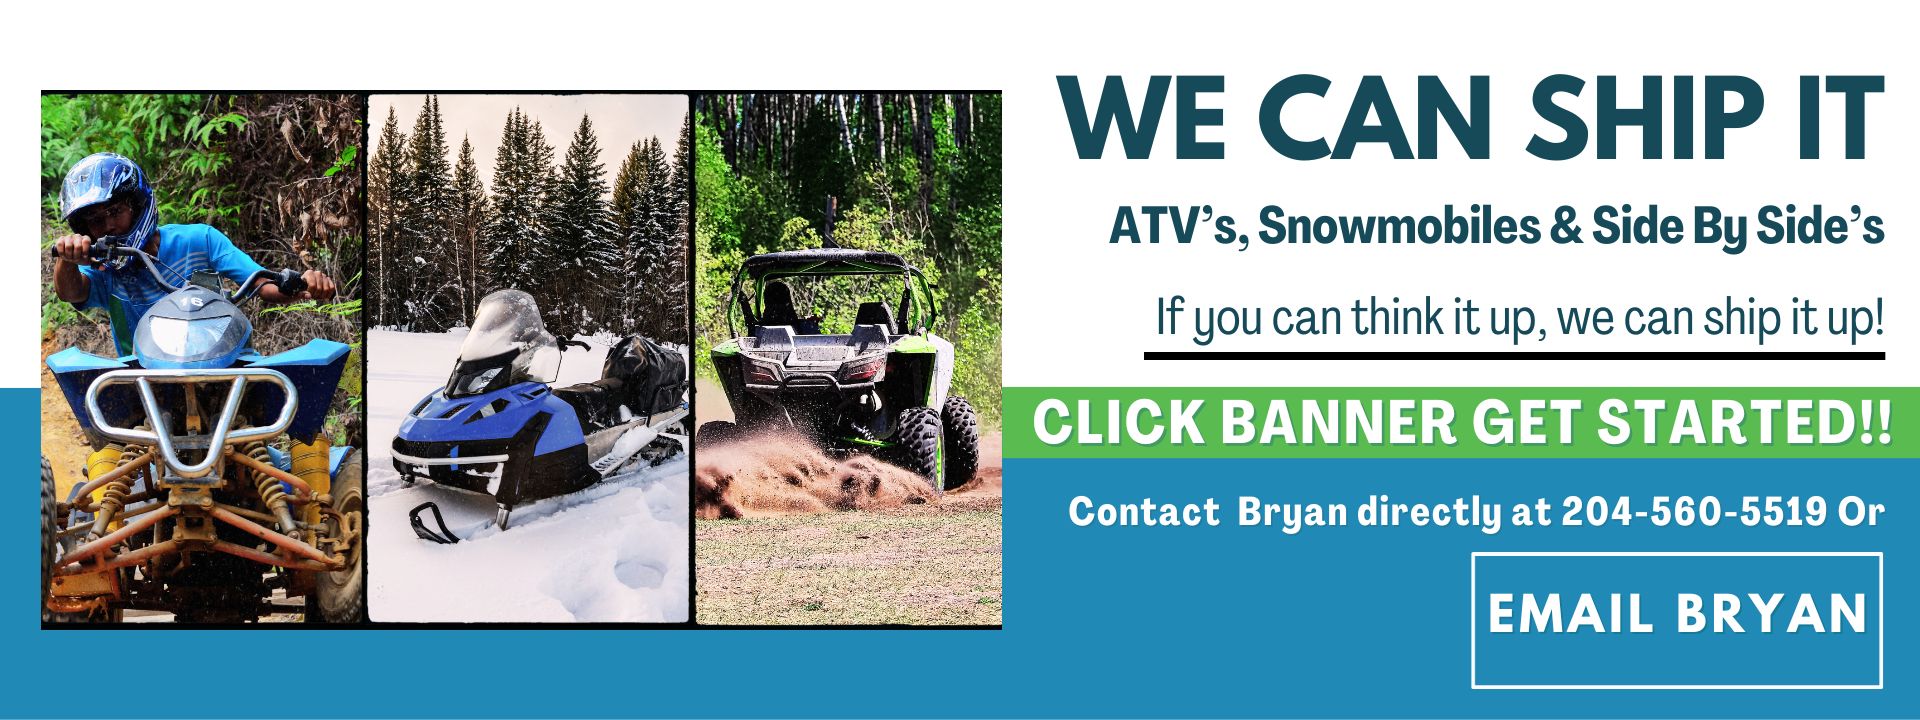 We Can Ship It - ATV's, Snowmobiles and Side-by-side's